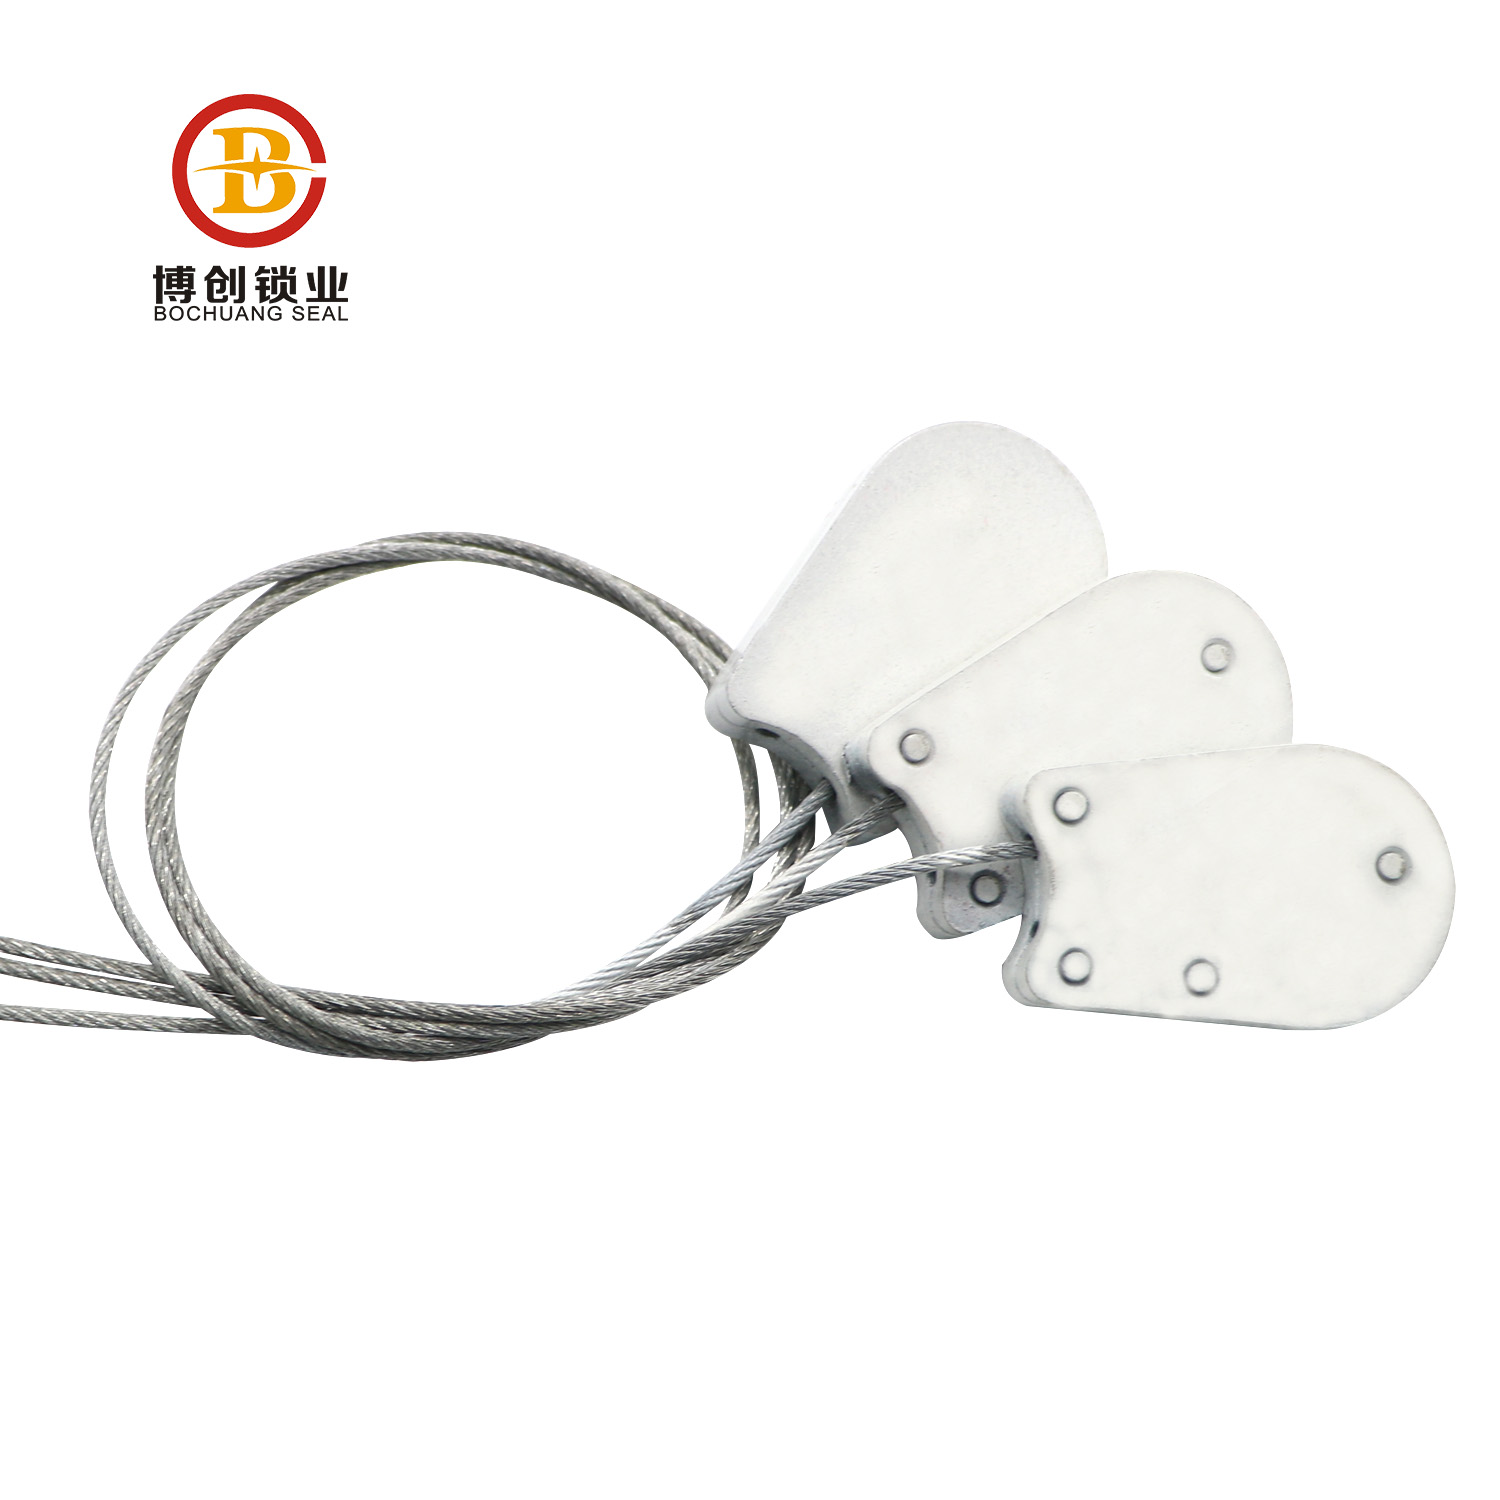 High Security cable seals for customs containers